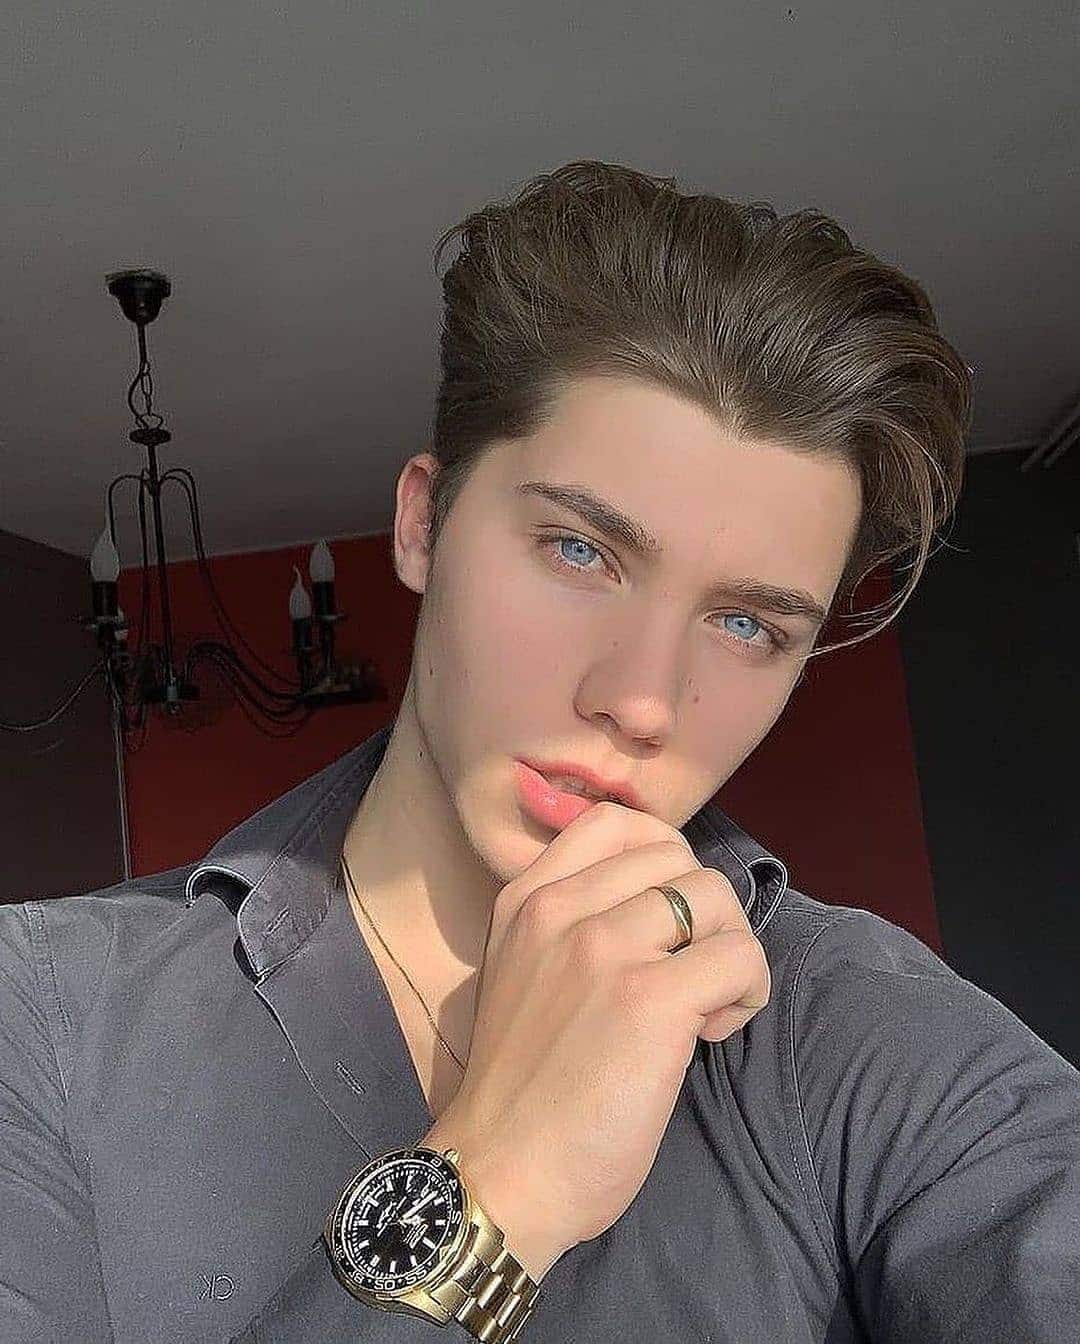 20 cool eBoy haircut ideas to try in 2021 to look great